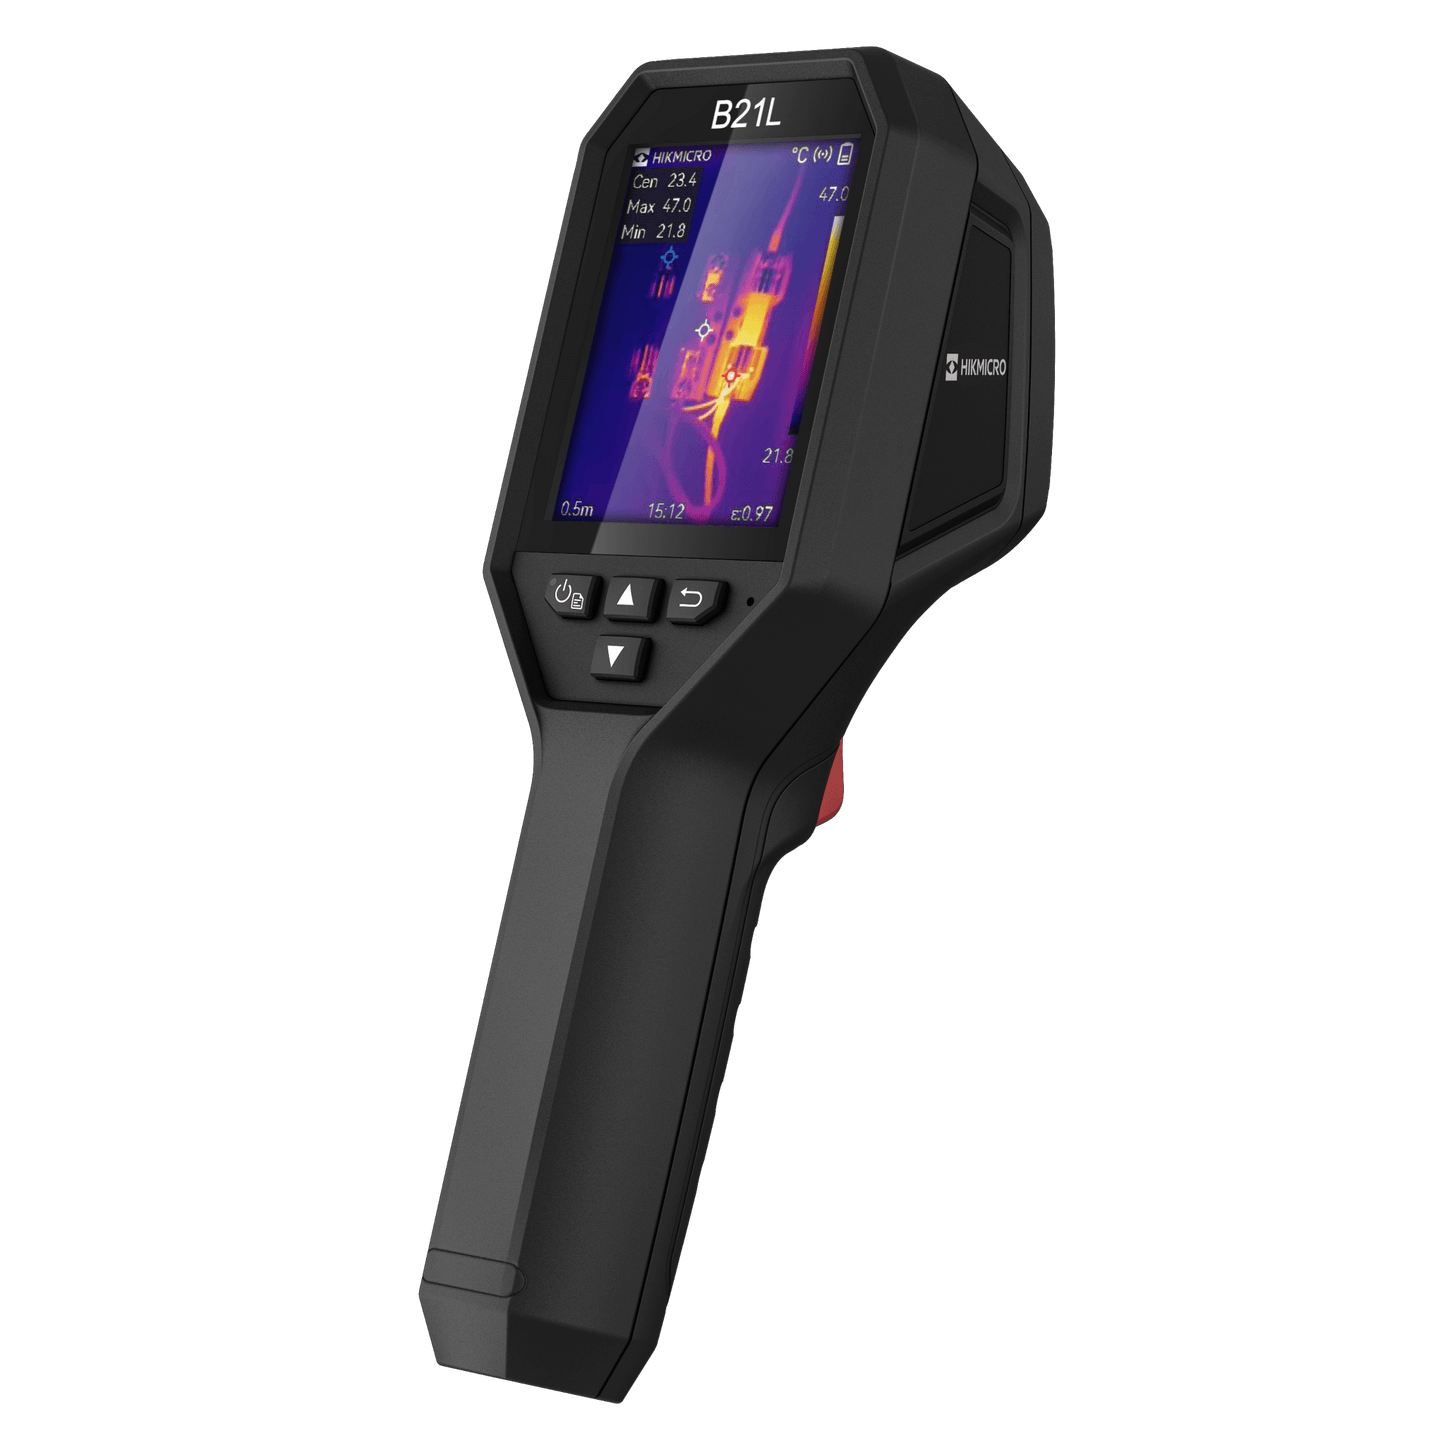 HikMicro B21L Handheld Thermal Imager View of Screen and Buttons